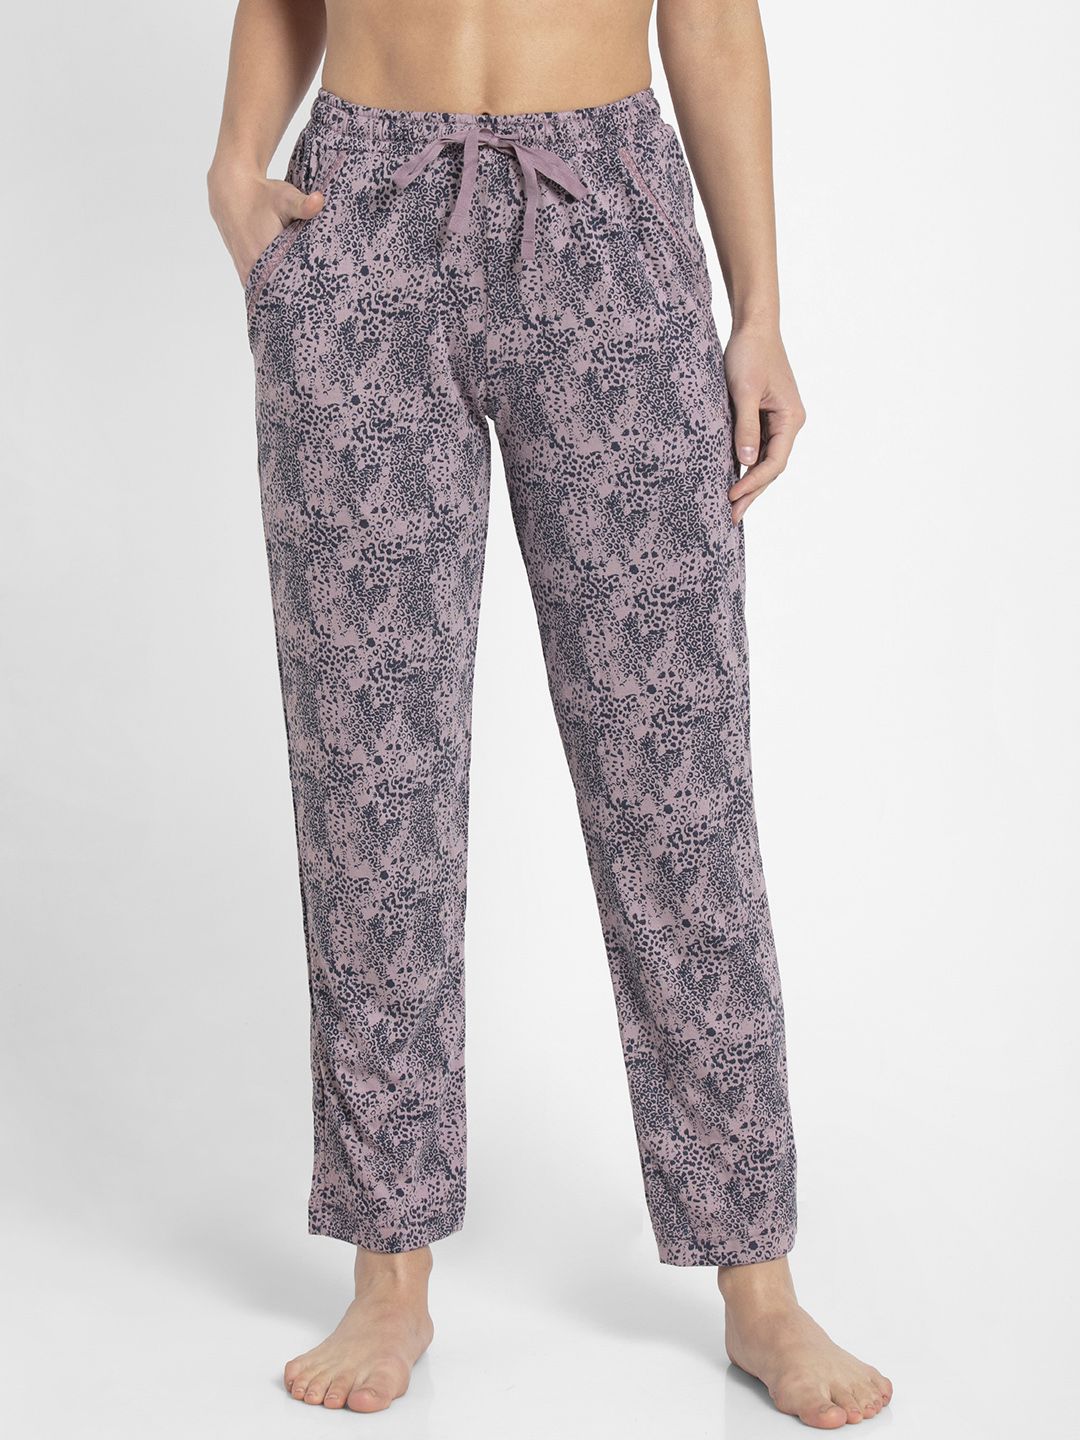 Jockey Relax Women Assorted Printed Modern Fit Lounge Pants Price in India